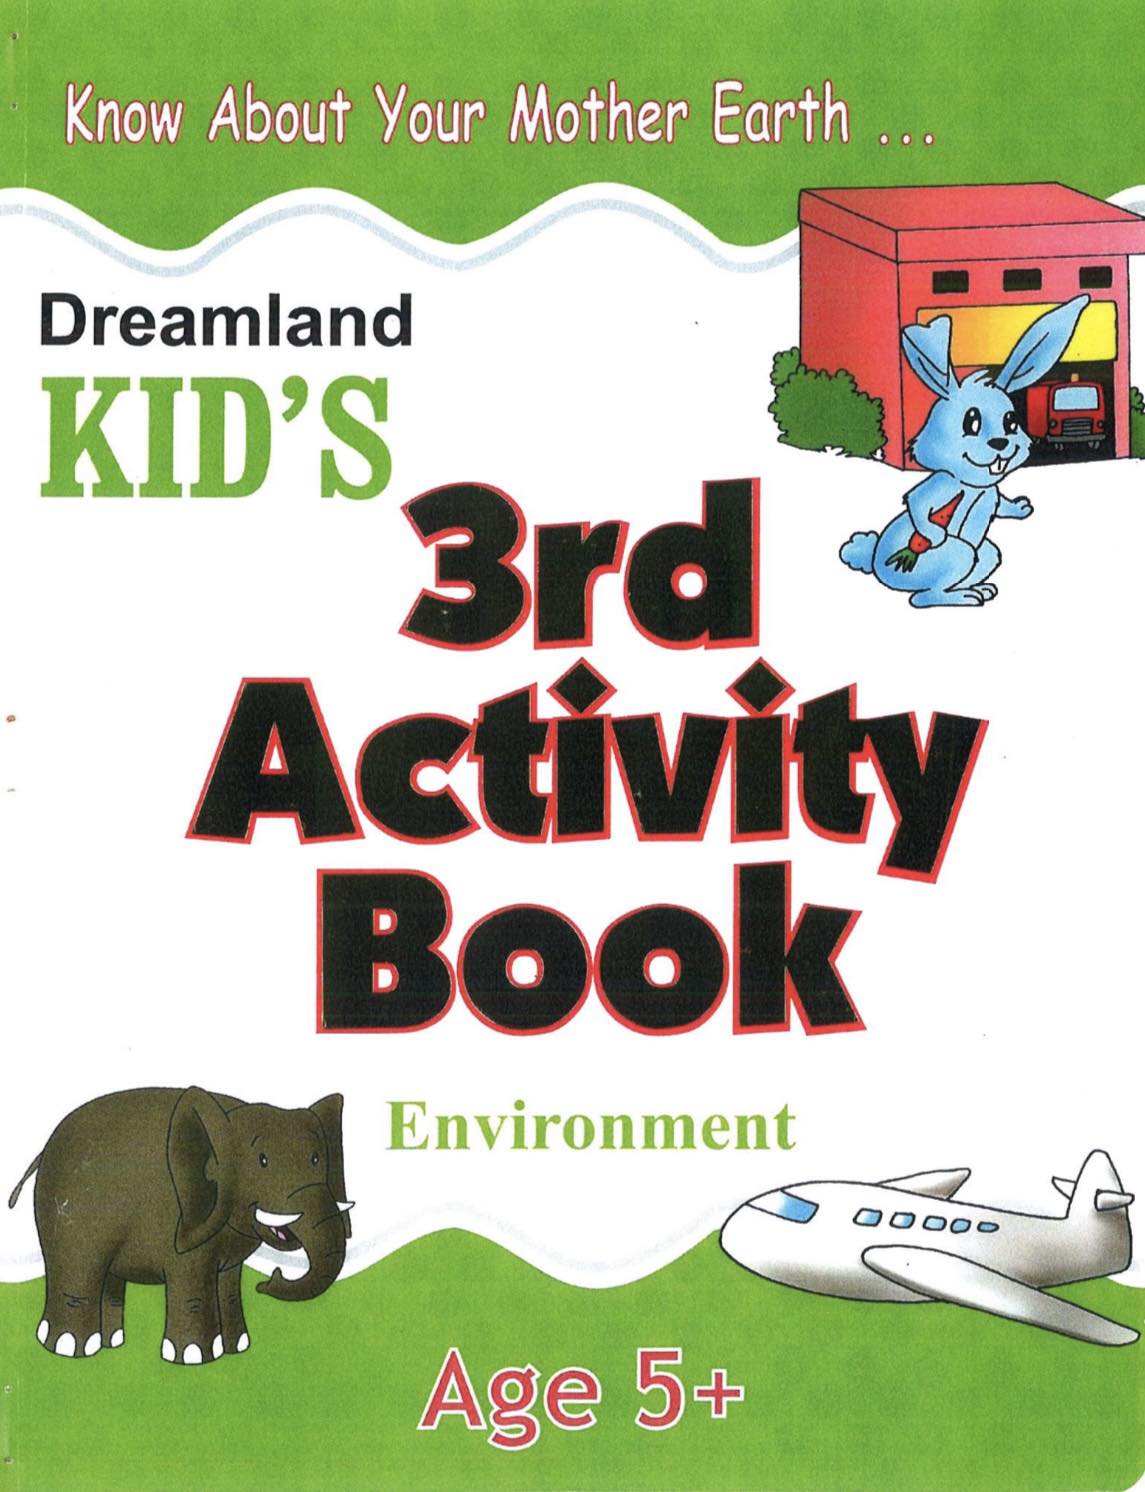 Dreamland Kid's 3rd Activity Book for Age 5+